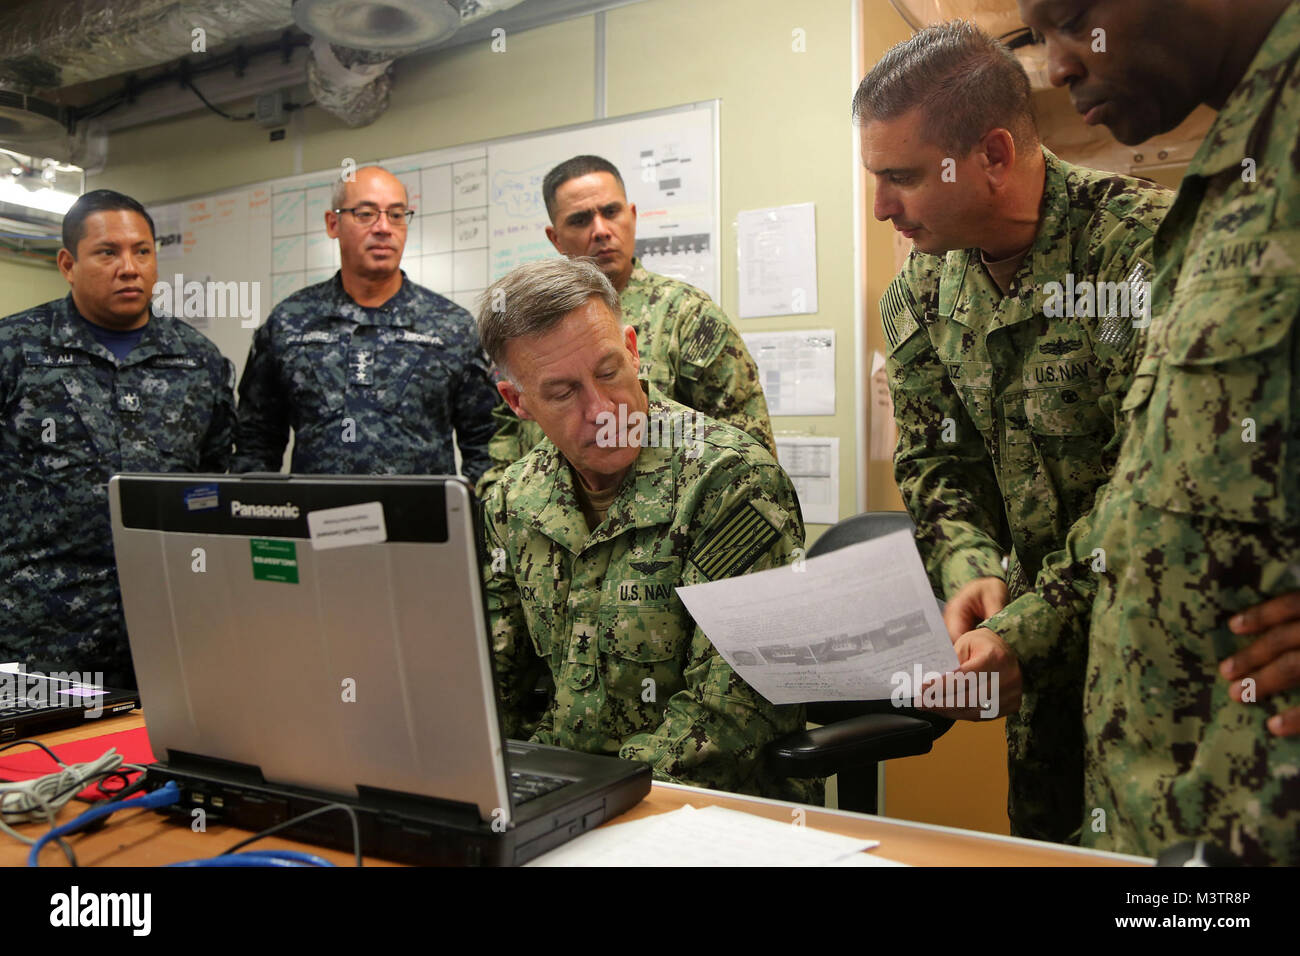 GULF OF PANAMA (Sept. 25, 2016) - Rear Adm. Sean Buck, Commander, U.S. Naval Forces Southern Command and Commander of U.S. 4th Fleet, and Capt. Angel Cruz, Deputy Commander, Destroyer Squadron 40, discuss UNITAS 2016 mission and strategic objectives while on board USNS Spearhead (T-EPF 1). UNITAS is an annual multi-national exercise that focuses on strengthening our existing regional partnerships and encourages establishing new relationships through the exchange of maritime mission-focused knowledge and expertise throughout the exercise. (U.S. Navy Photo by Mass Communication Specialist 1st Cl Stock Photo